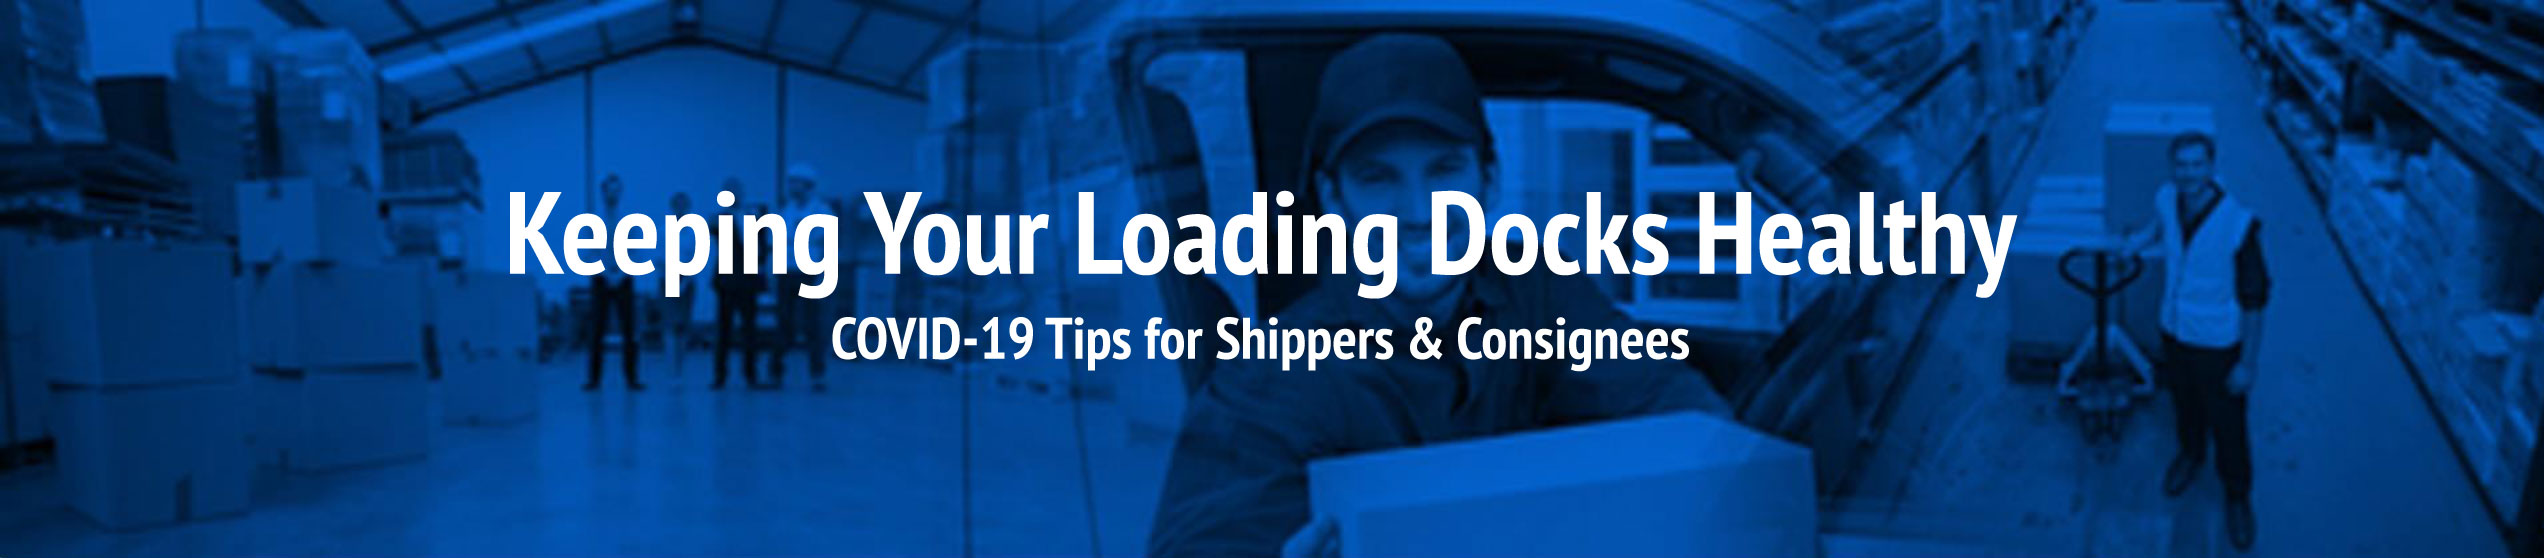 Keeping Your Loading Docks Healthy